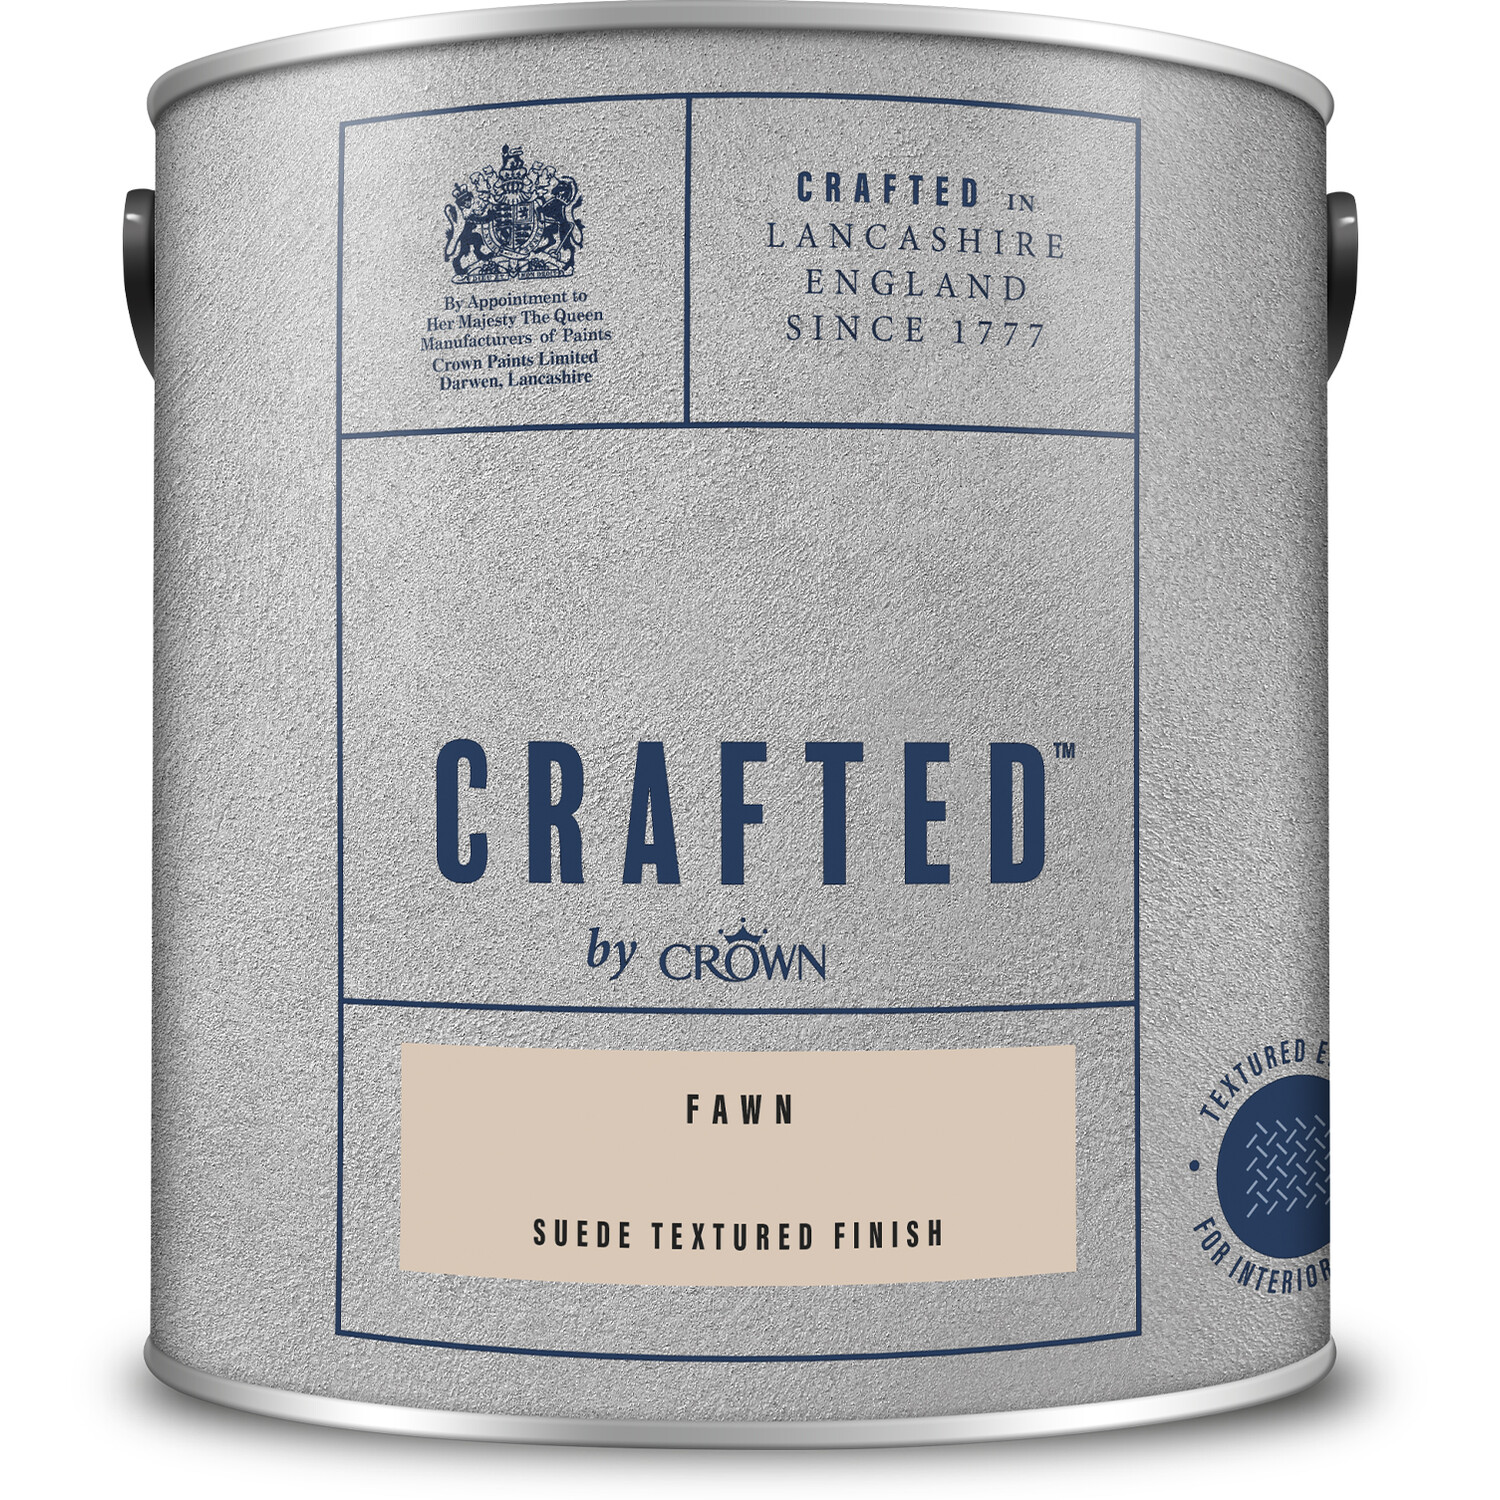 Crown Crafted Walls Fawn Suede Textured Finish Paint 2.5L Image 2